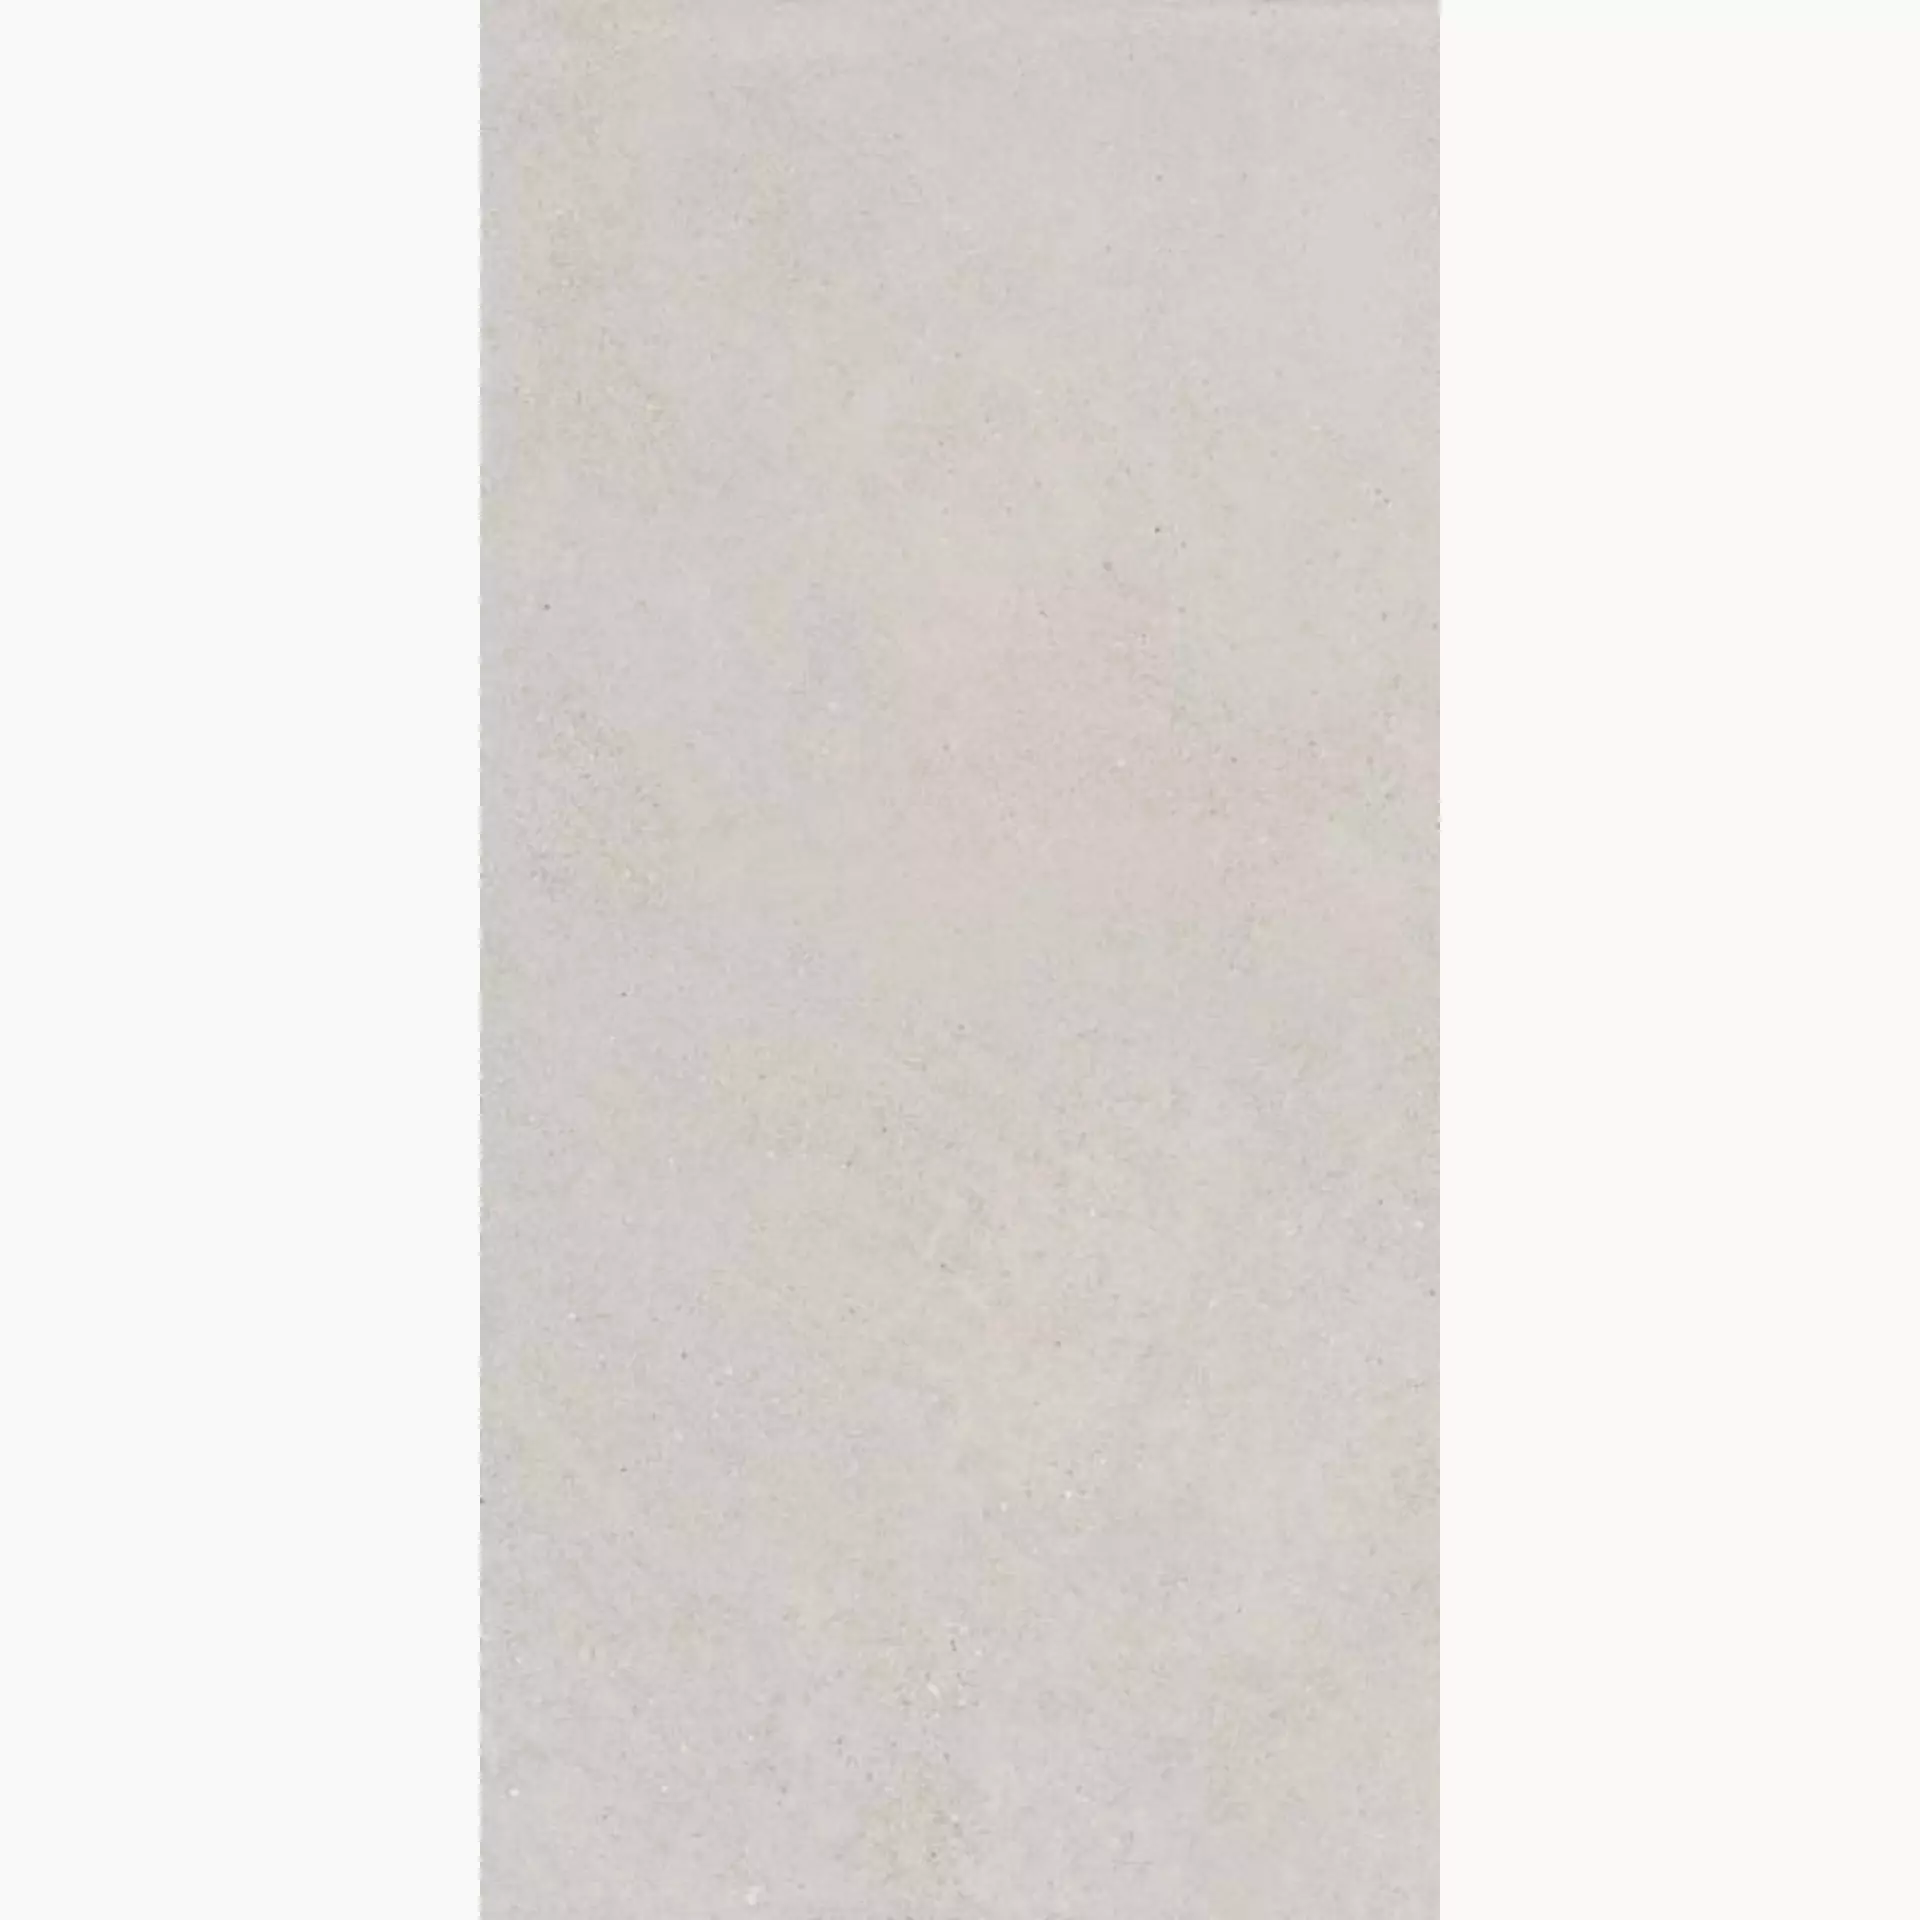 Sant Agostino Silkystone Greige Natural CSASKGR612 60x120cm rectified 10mm